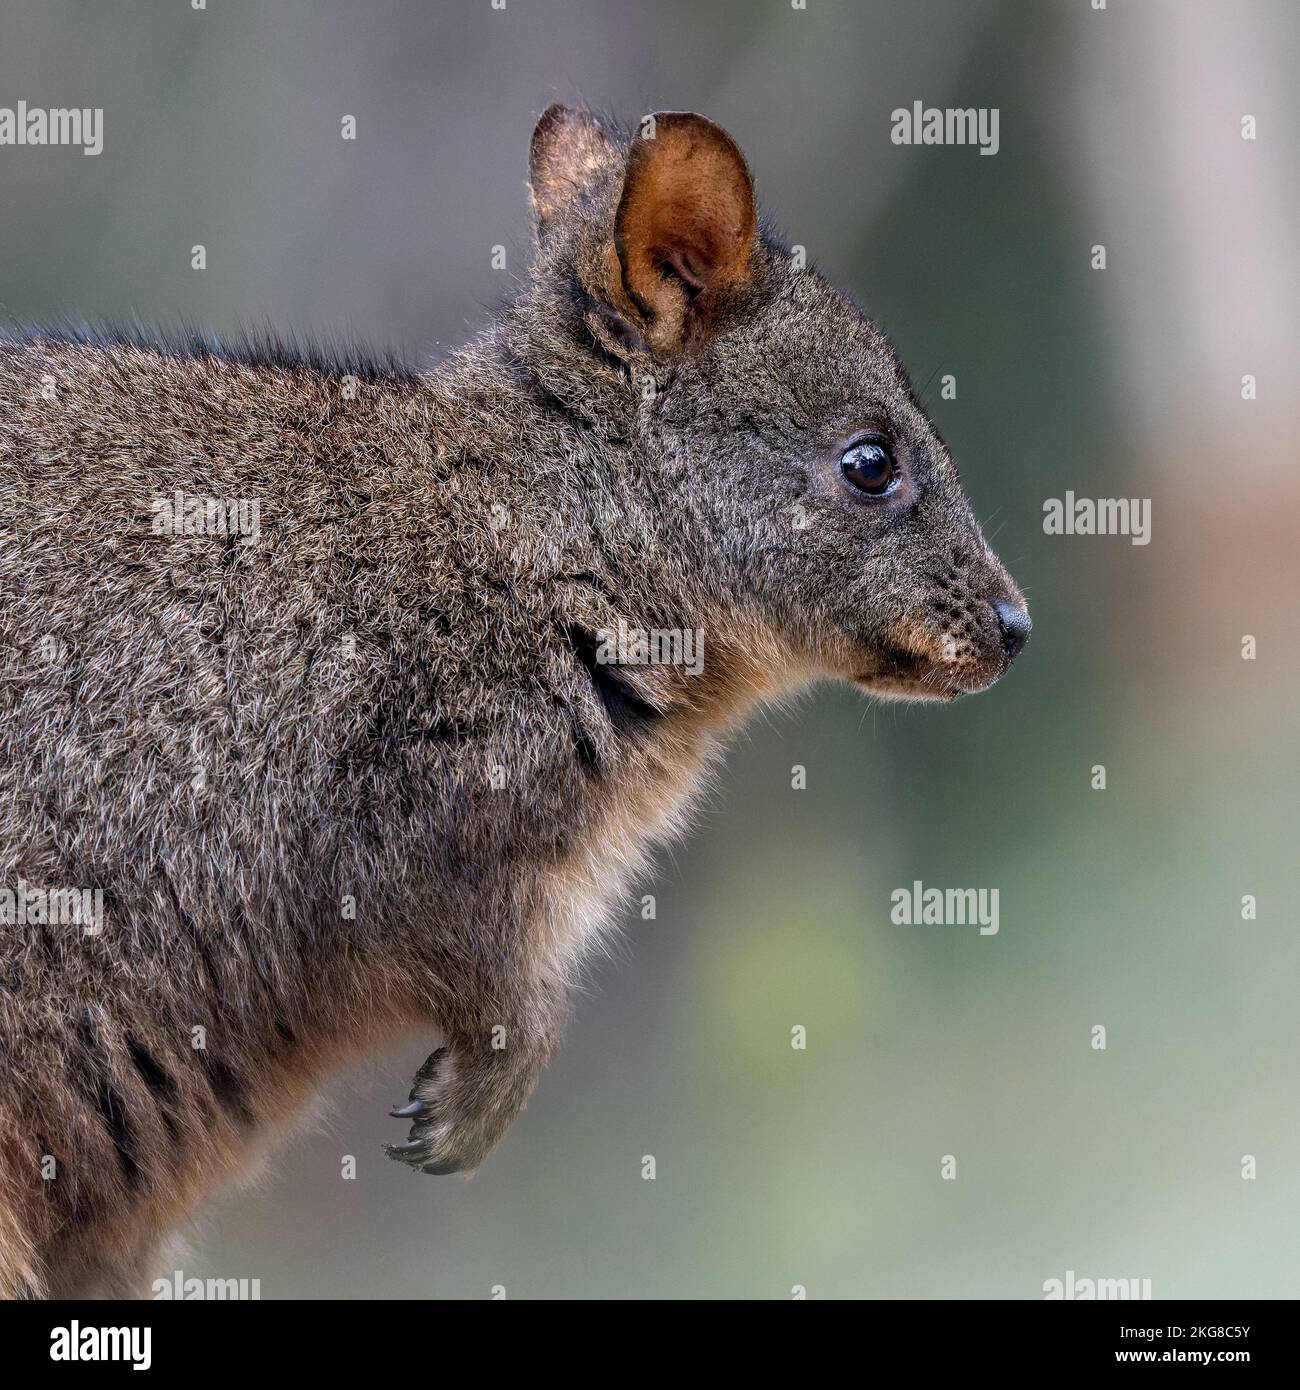 A side view closeup of adorable Tasmanian pademelon wallaby on blur background Stock Photo